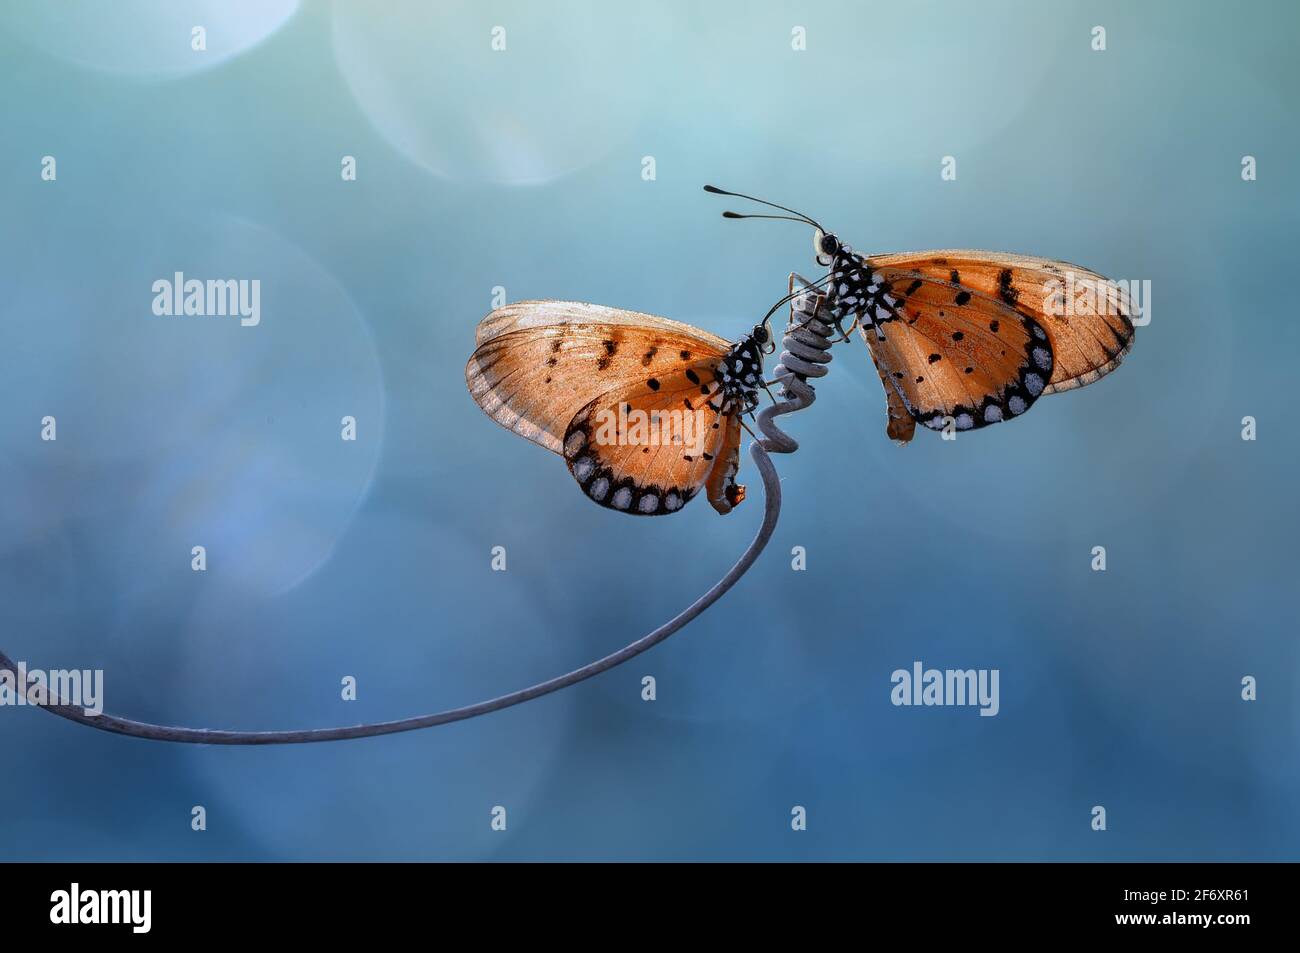 Two butterflies on a spiral tendril on a plant, Indonesia Stock Photo